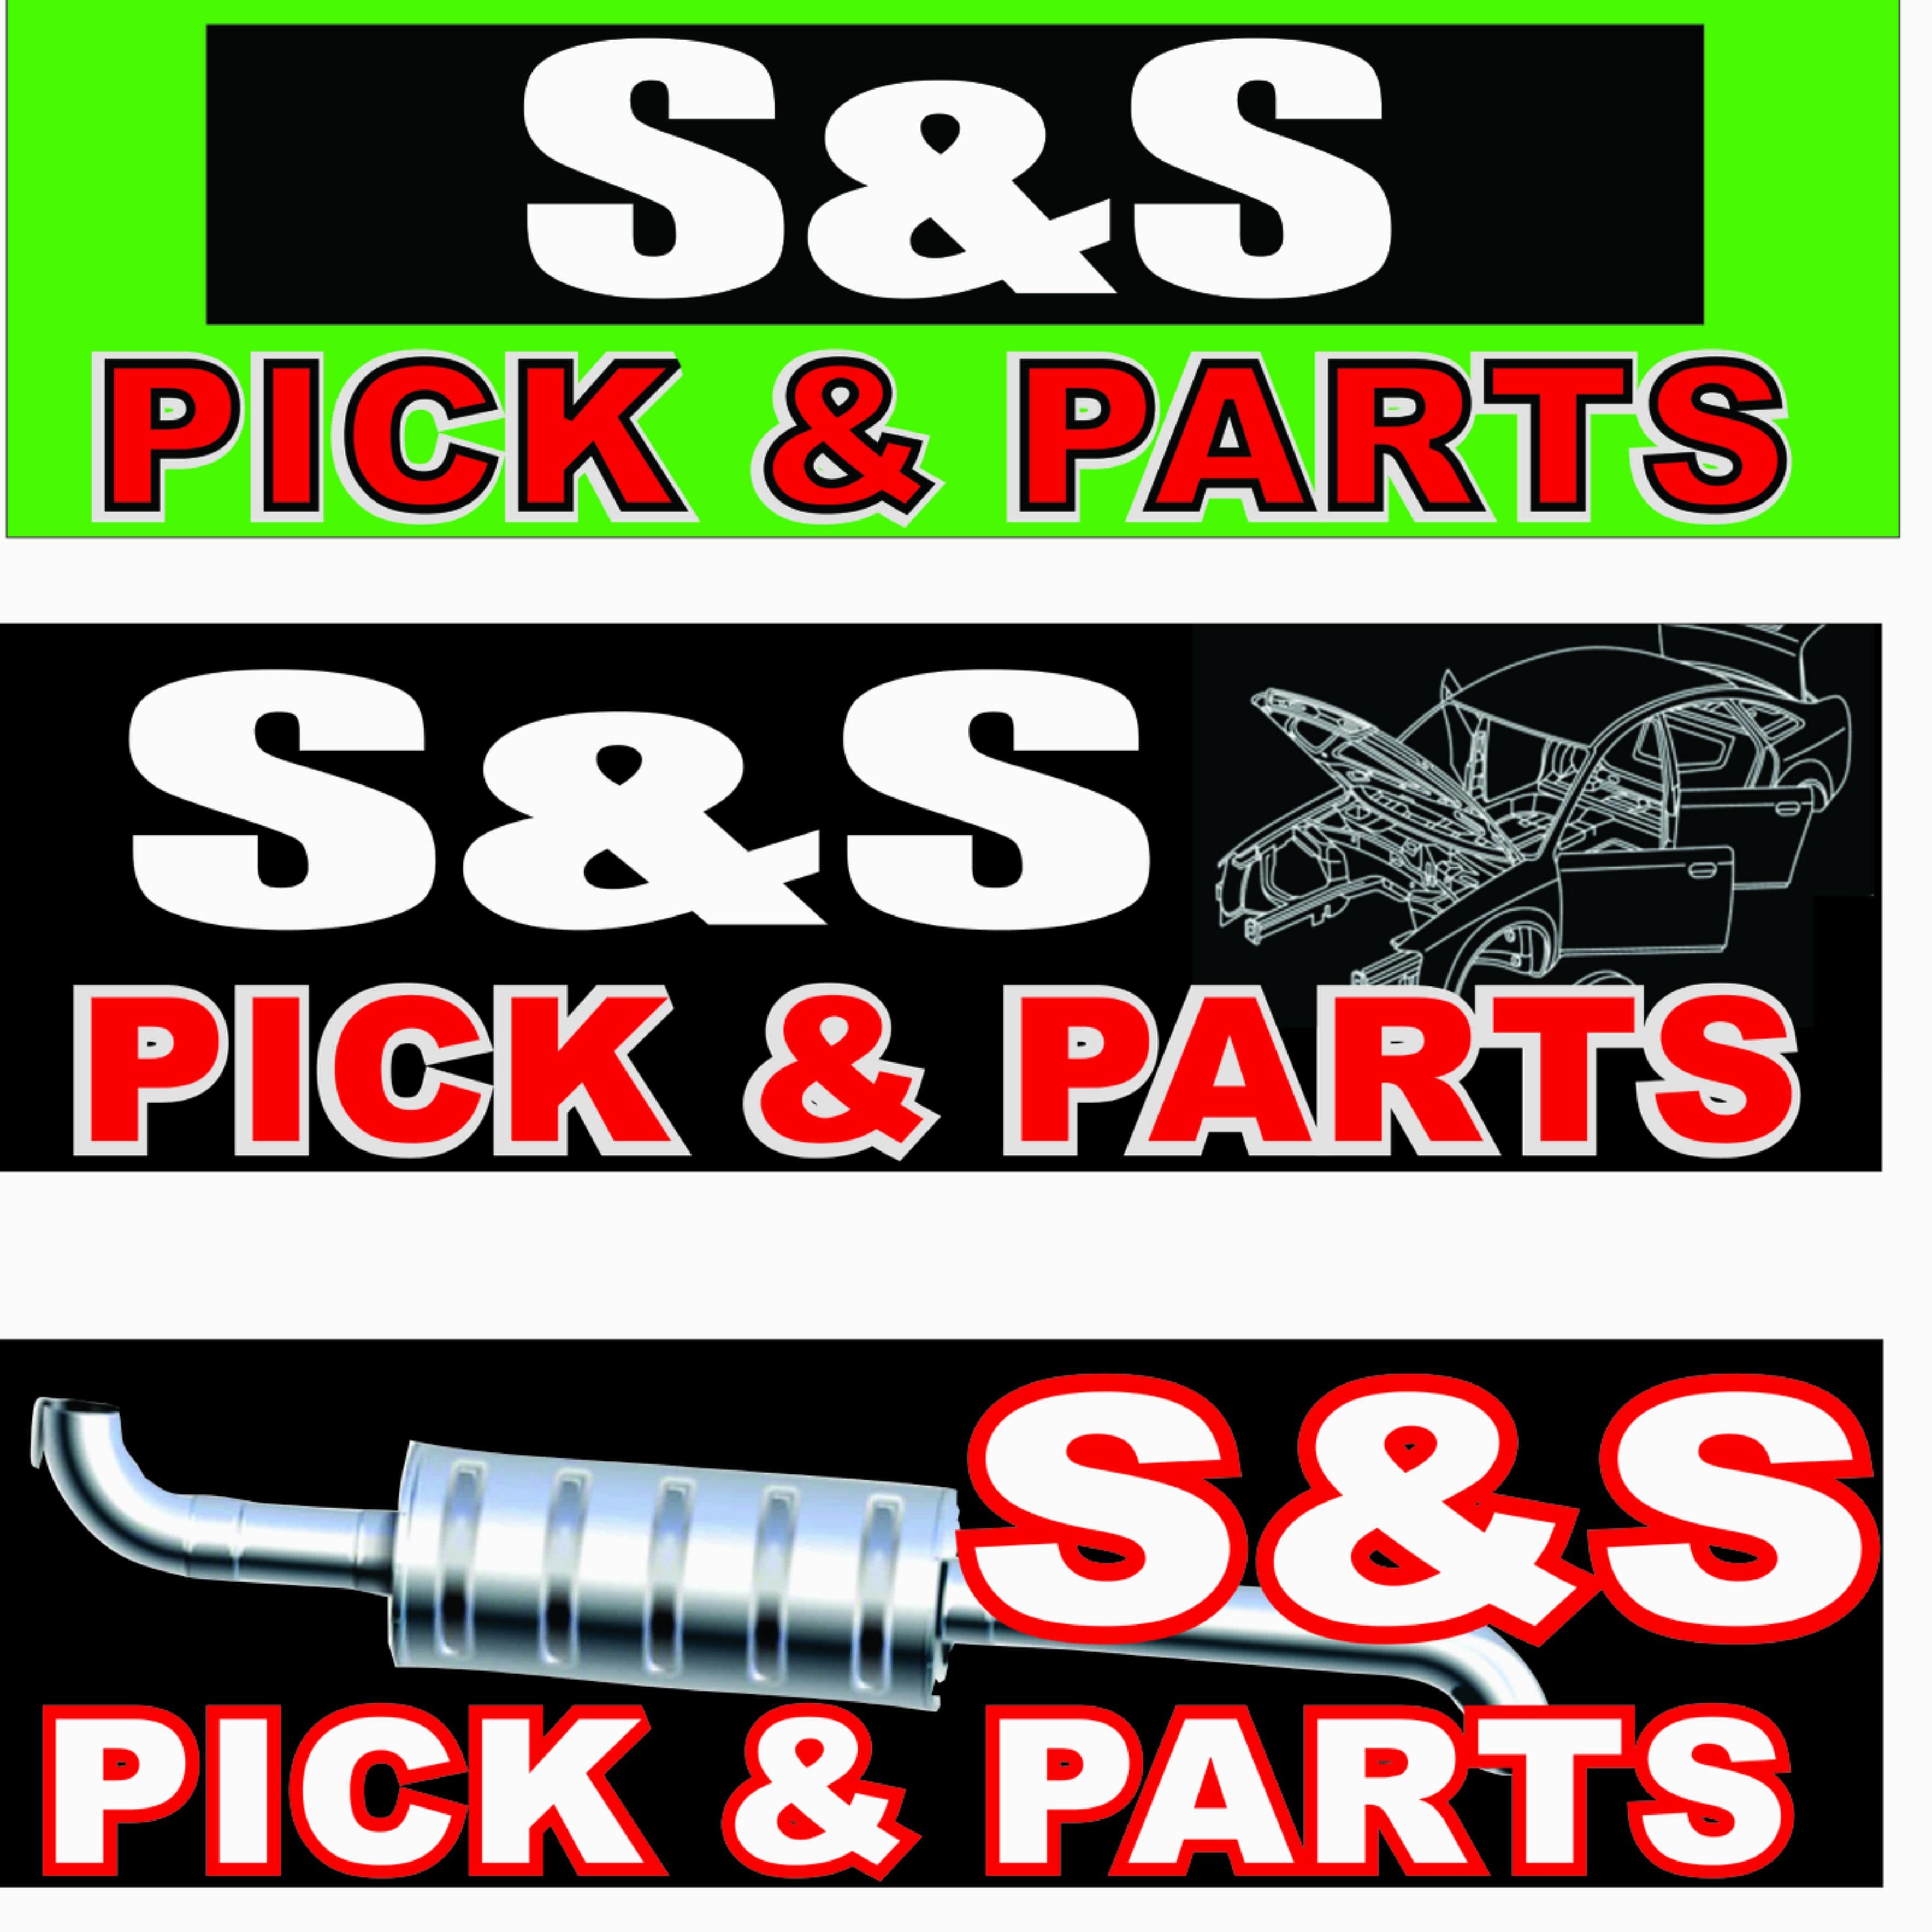 S & S Pick & Parts & Sadler's Recycling Center Coupons ...